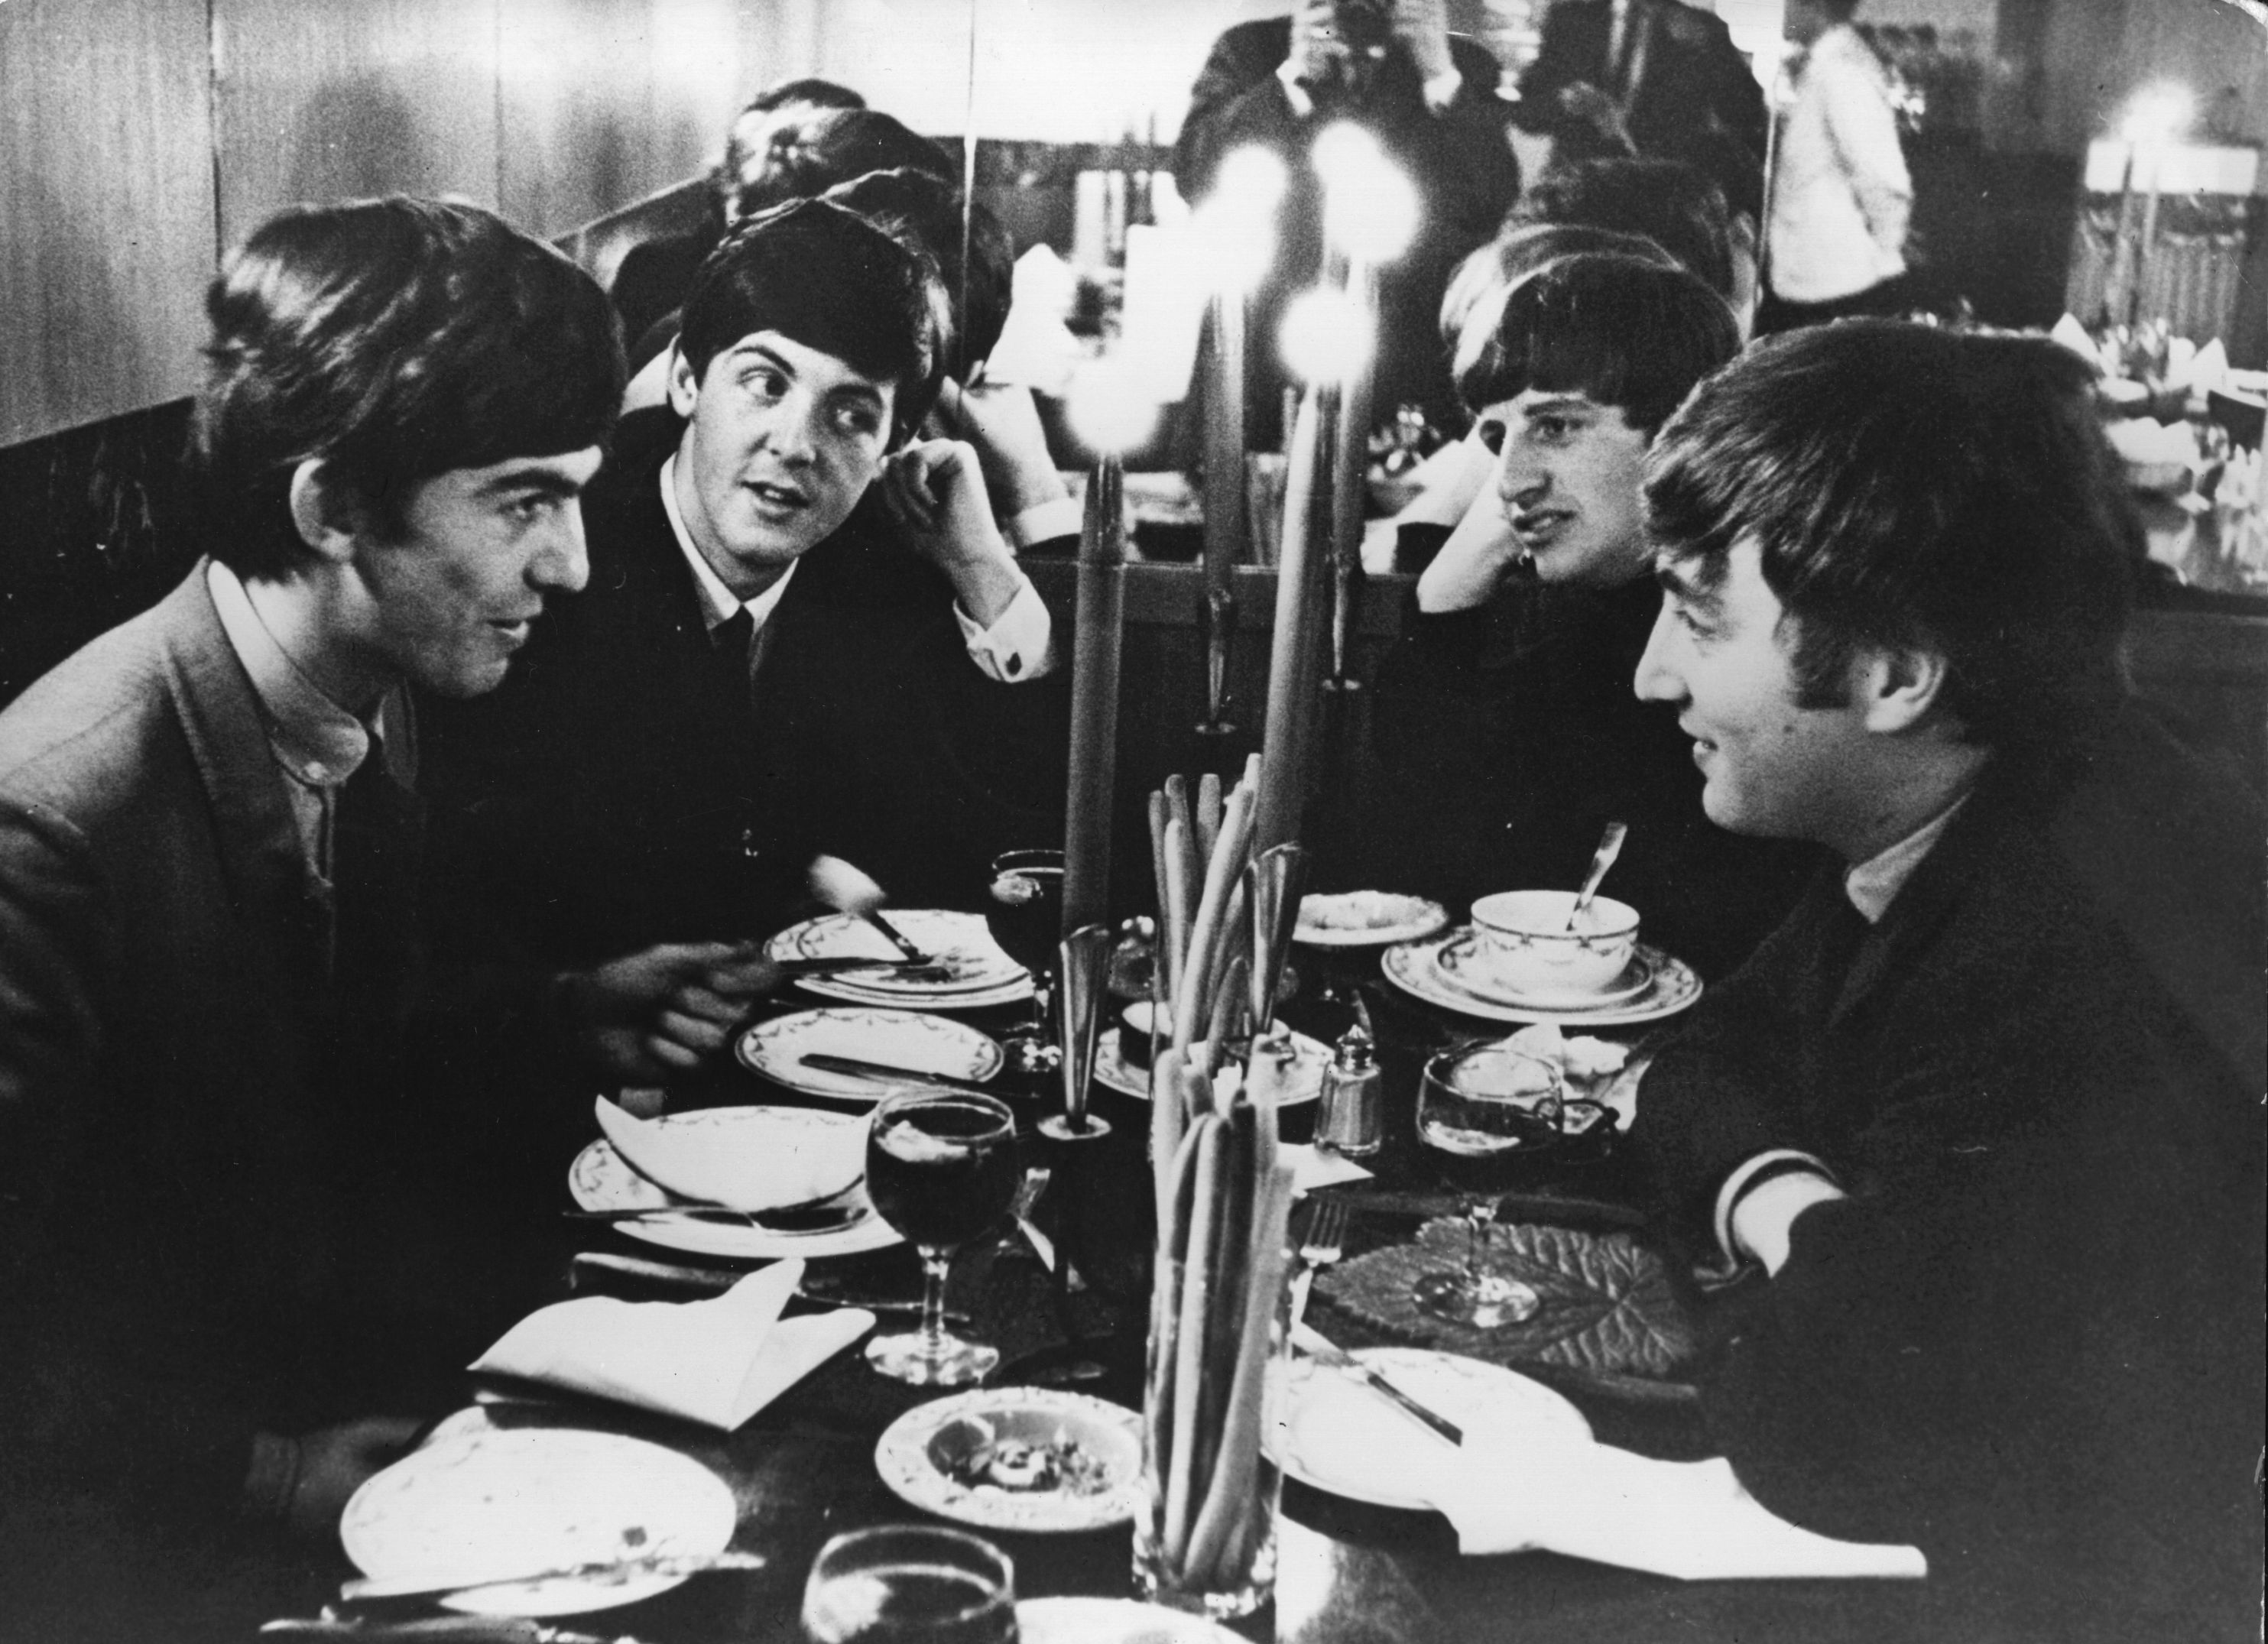 The Beatles meet for the first time after their holidays by candlelight at the Star Steak House in Shaftsbury Avenue